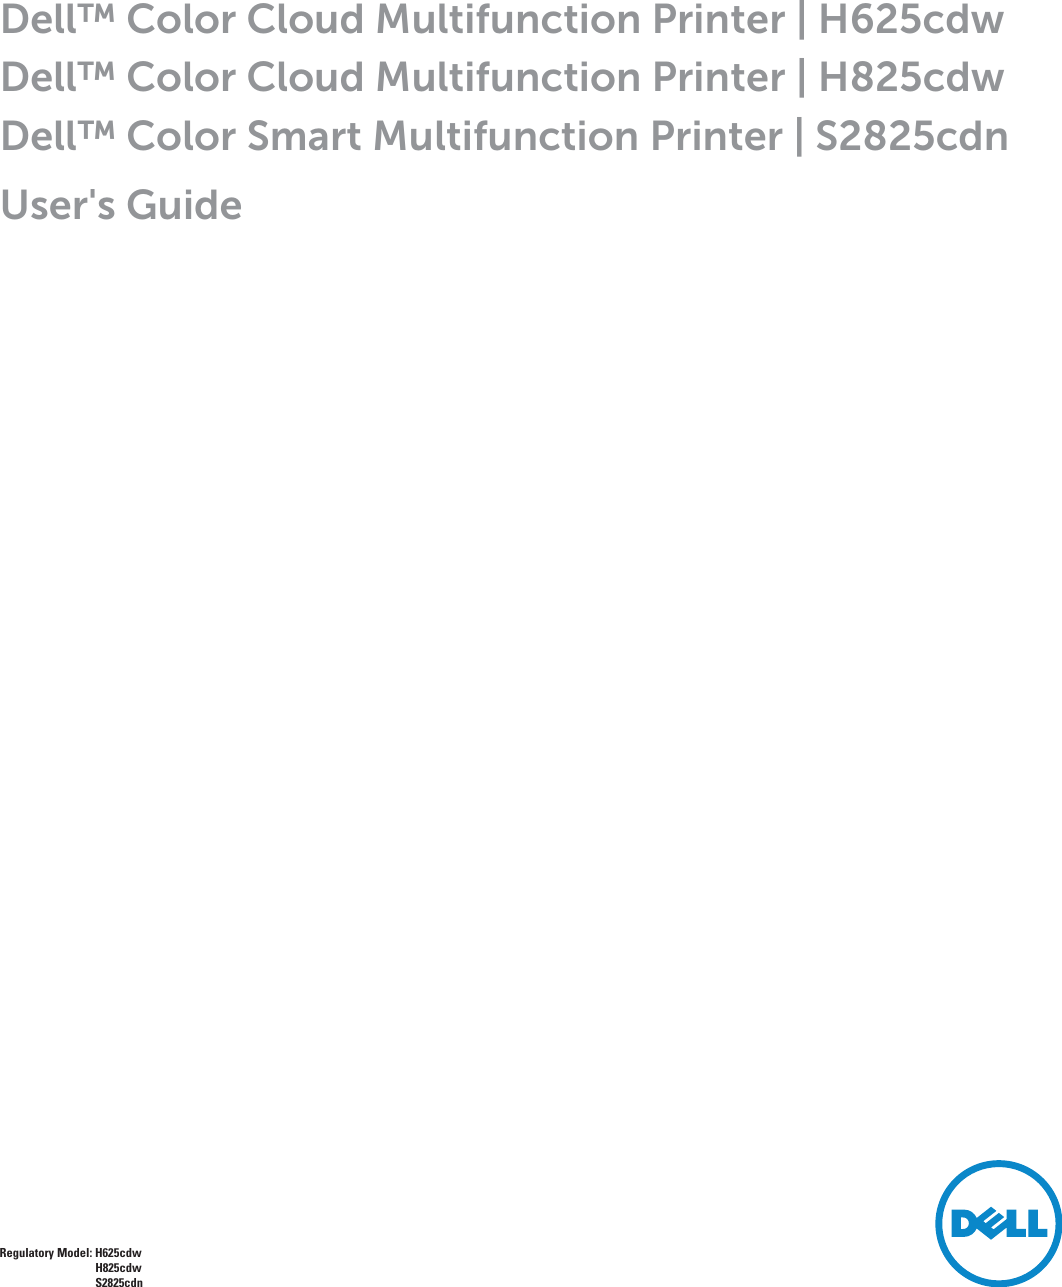 Dell™ Color Cloud Multifunction Printer | H625cdwDell™ Color Cloud Multifunction Printer | H825cdwDell™ Color Smart Multifunction Printer | S2825cdnUser&apos;s GuideRegulatory Model: H625cdwH825cdwS2825cdn